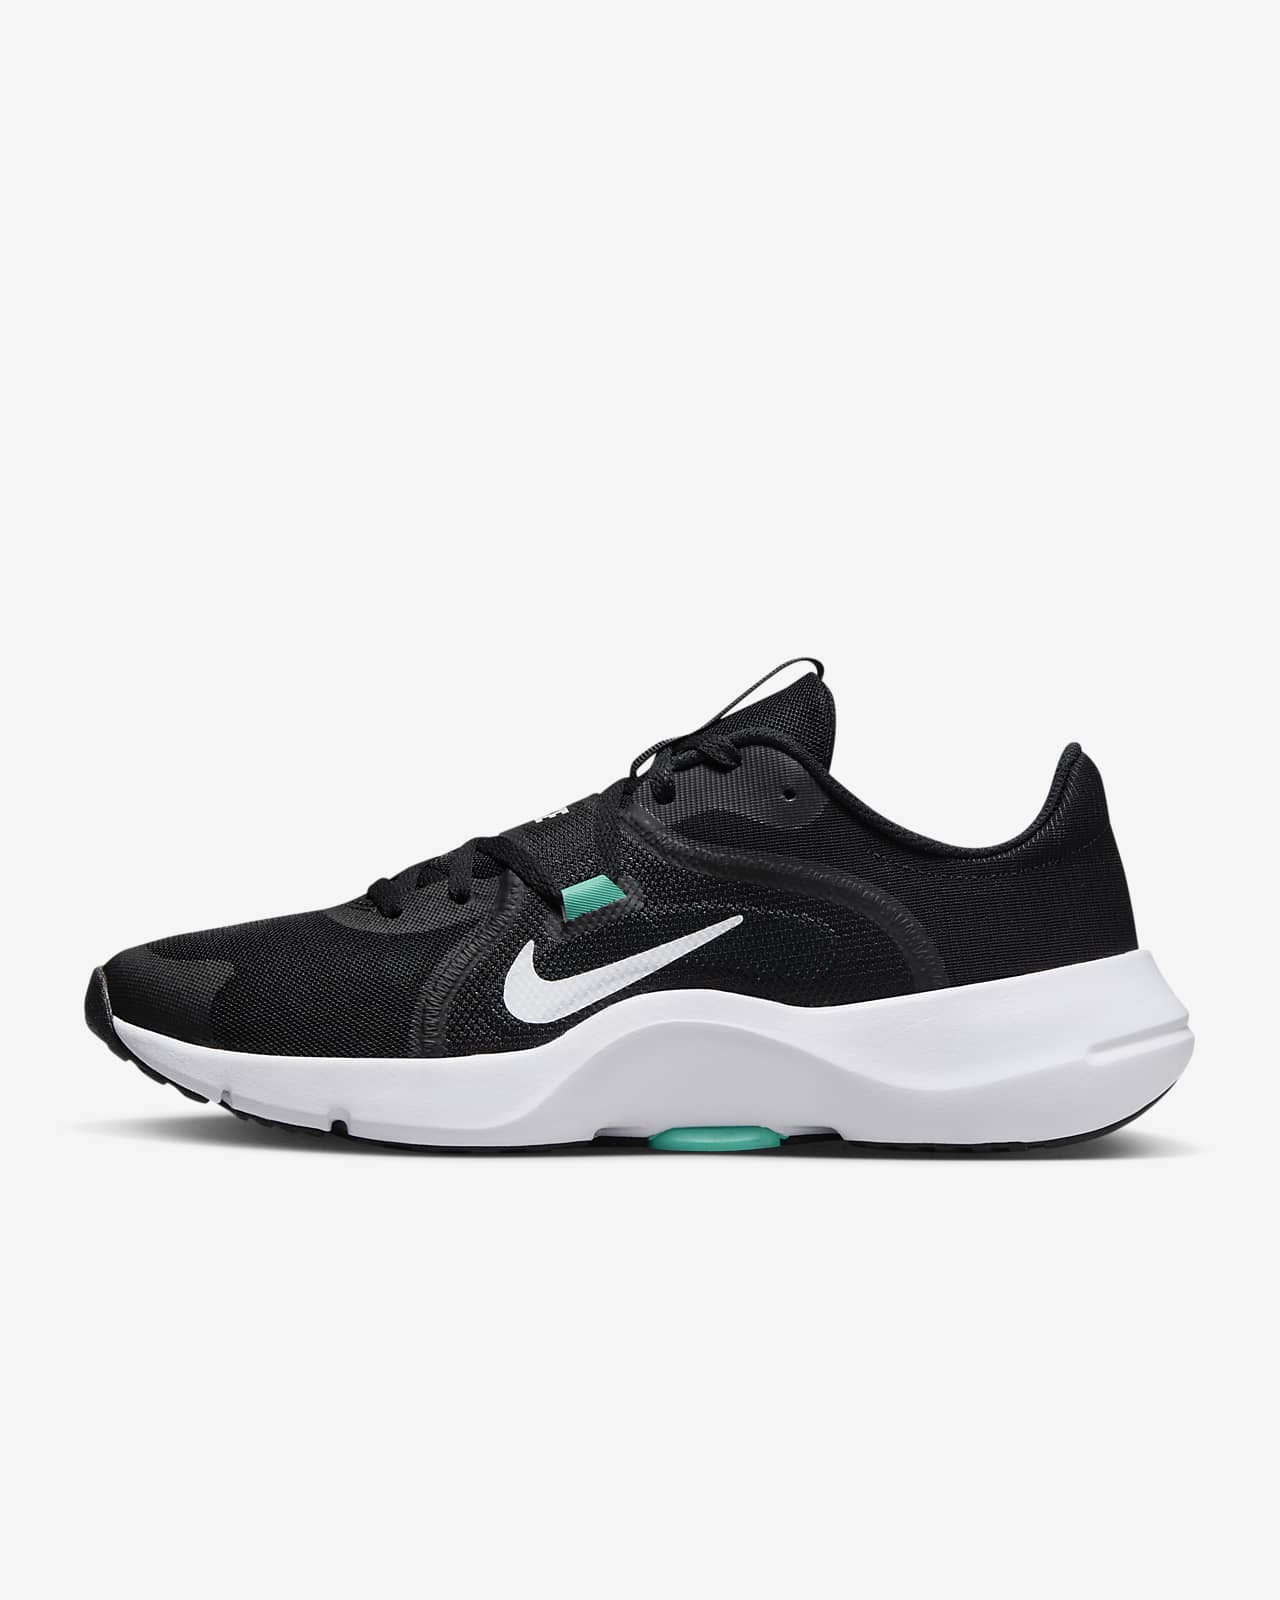 Men's Lifestyle Shoes. Nike ID